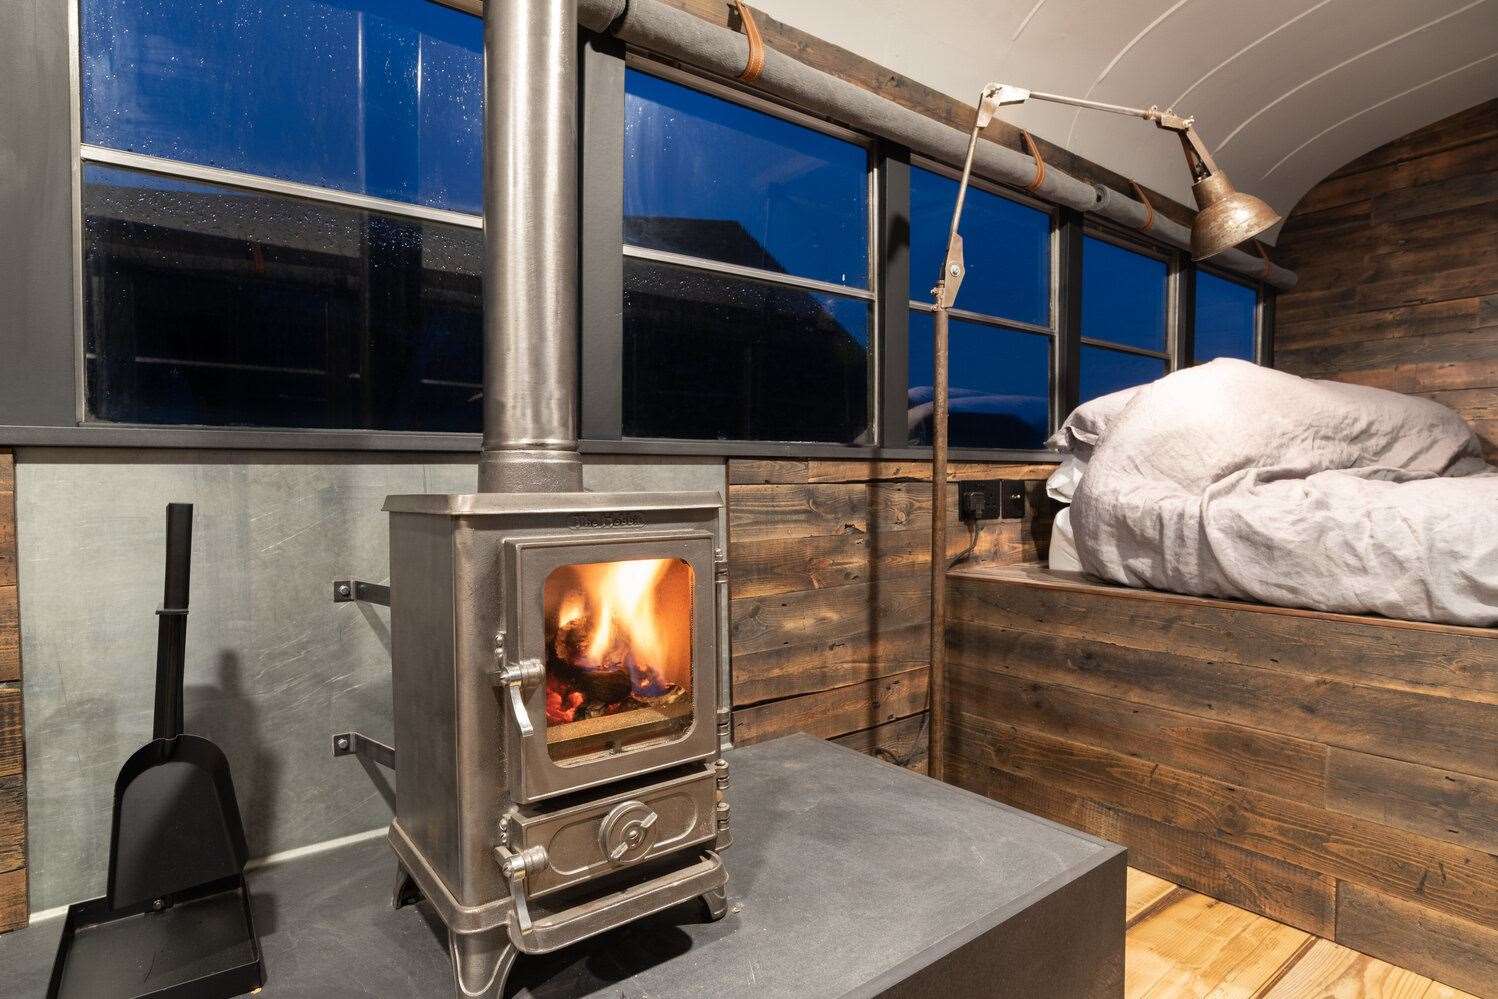 Converted American school bus Stay Wild is now an off grid retreat at Ash near Sandwich